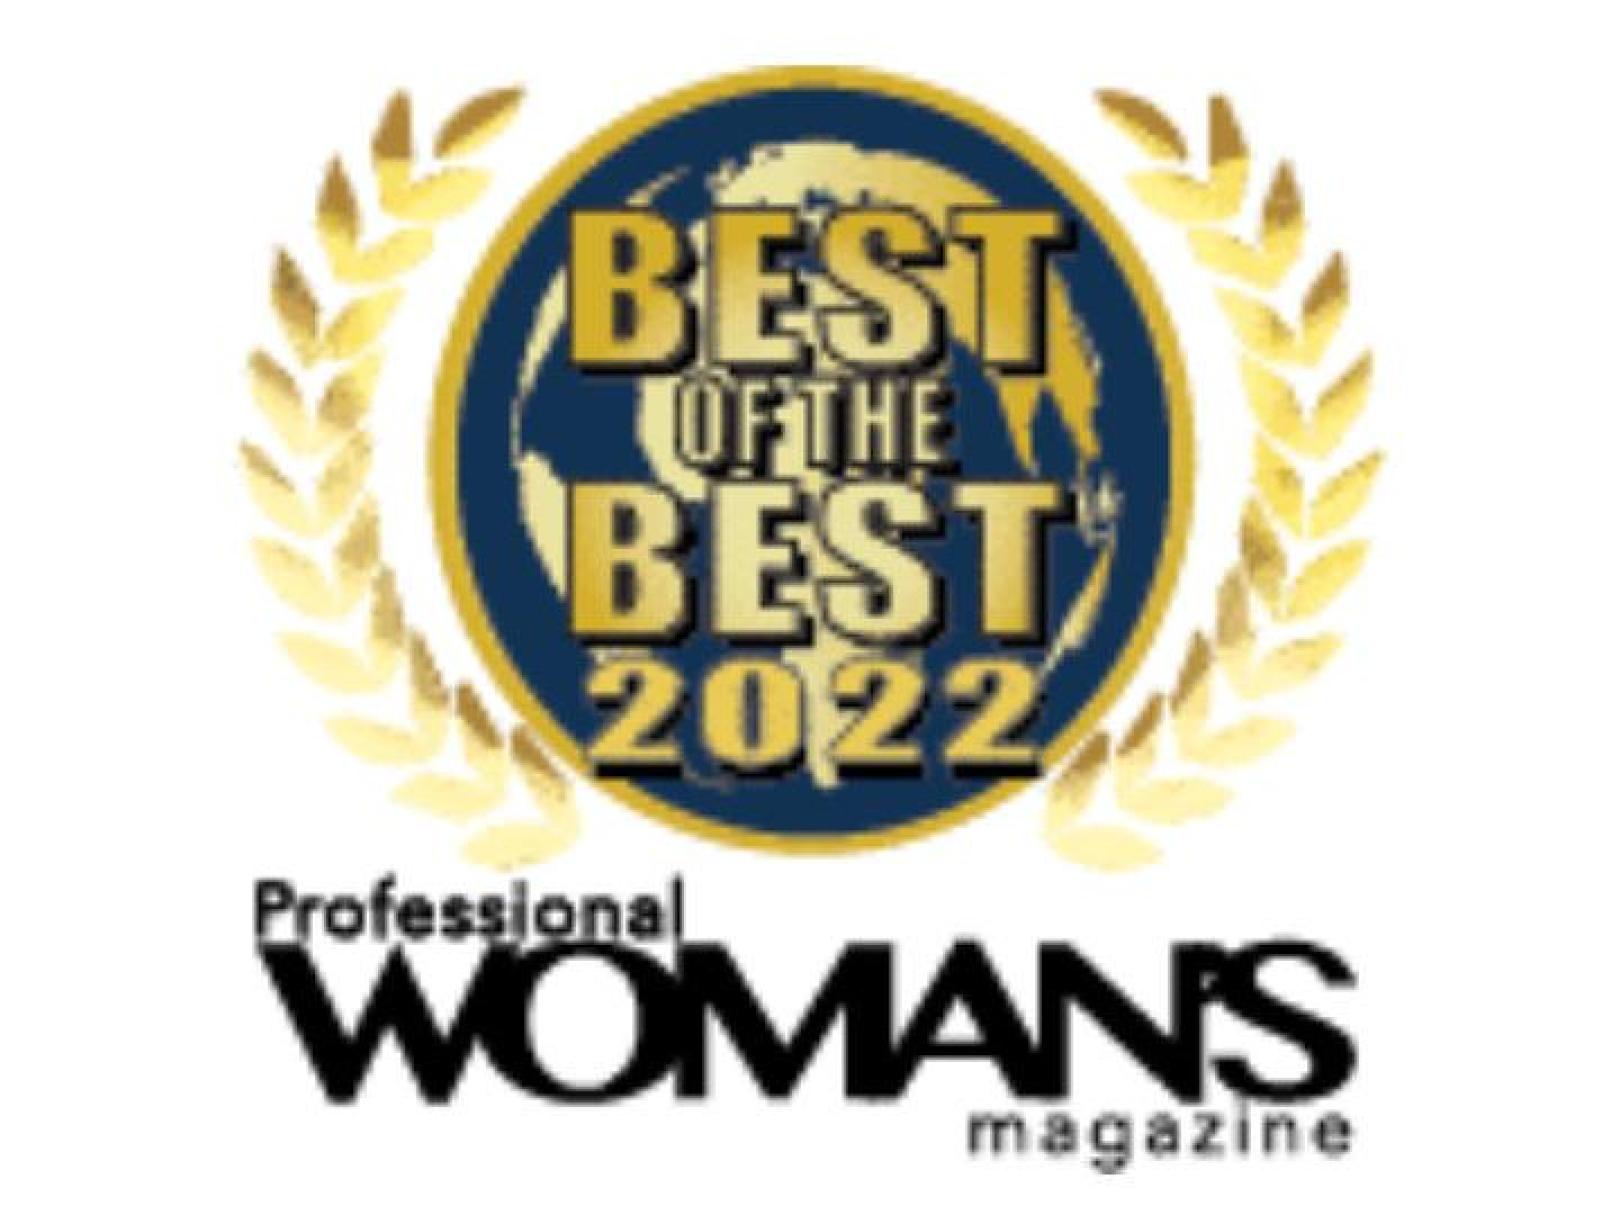 Professional Woman's Magazine 2022 Best of the Best